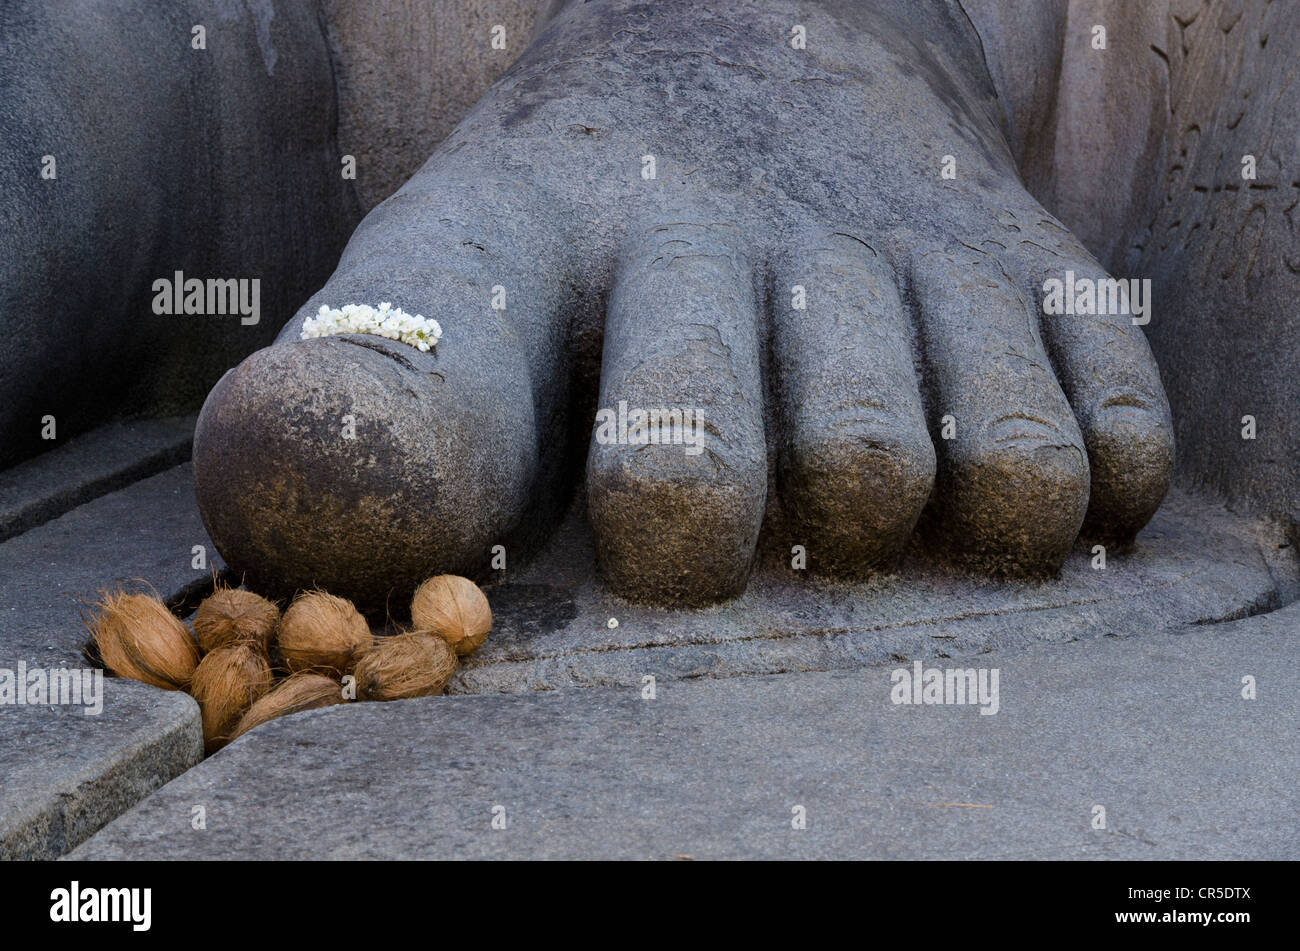 Coconuts and flowers as offerings at the feet of the gigantic statue of Gomateshwara in Sravanabelagola, Karnataka, India, Asia Stock Photo